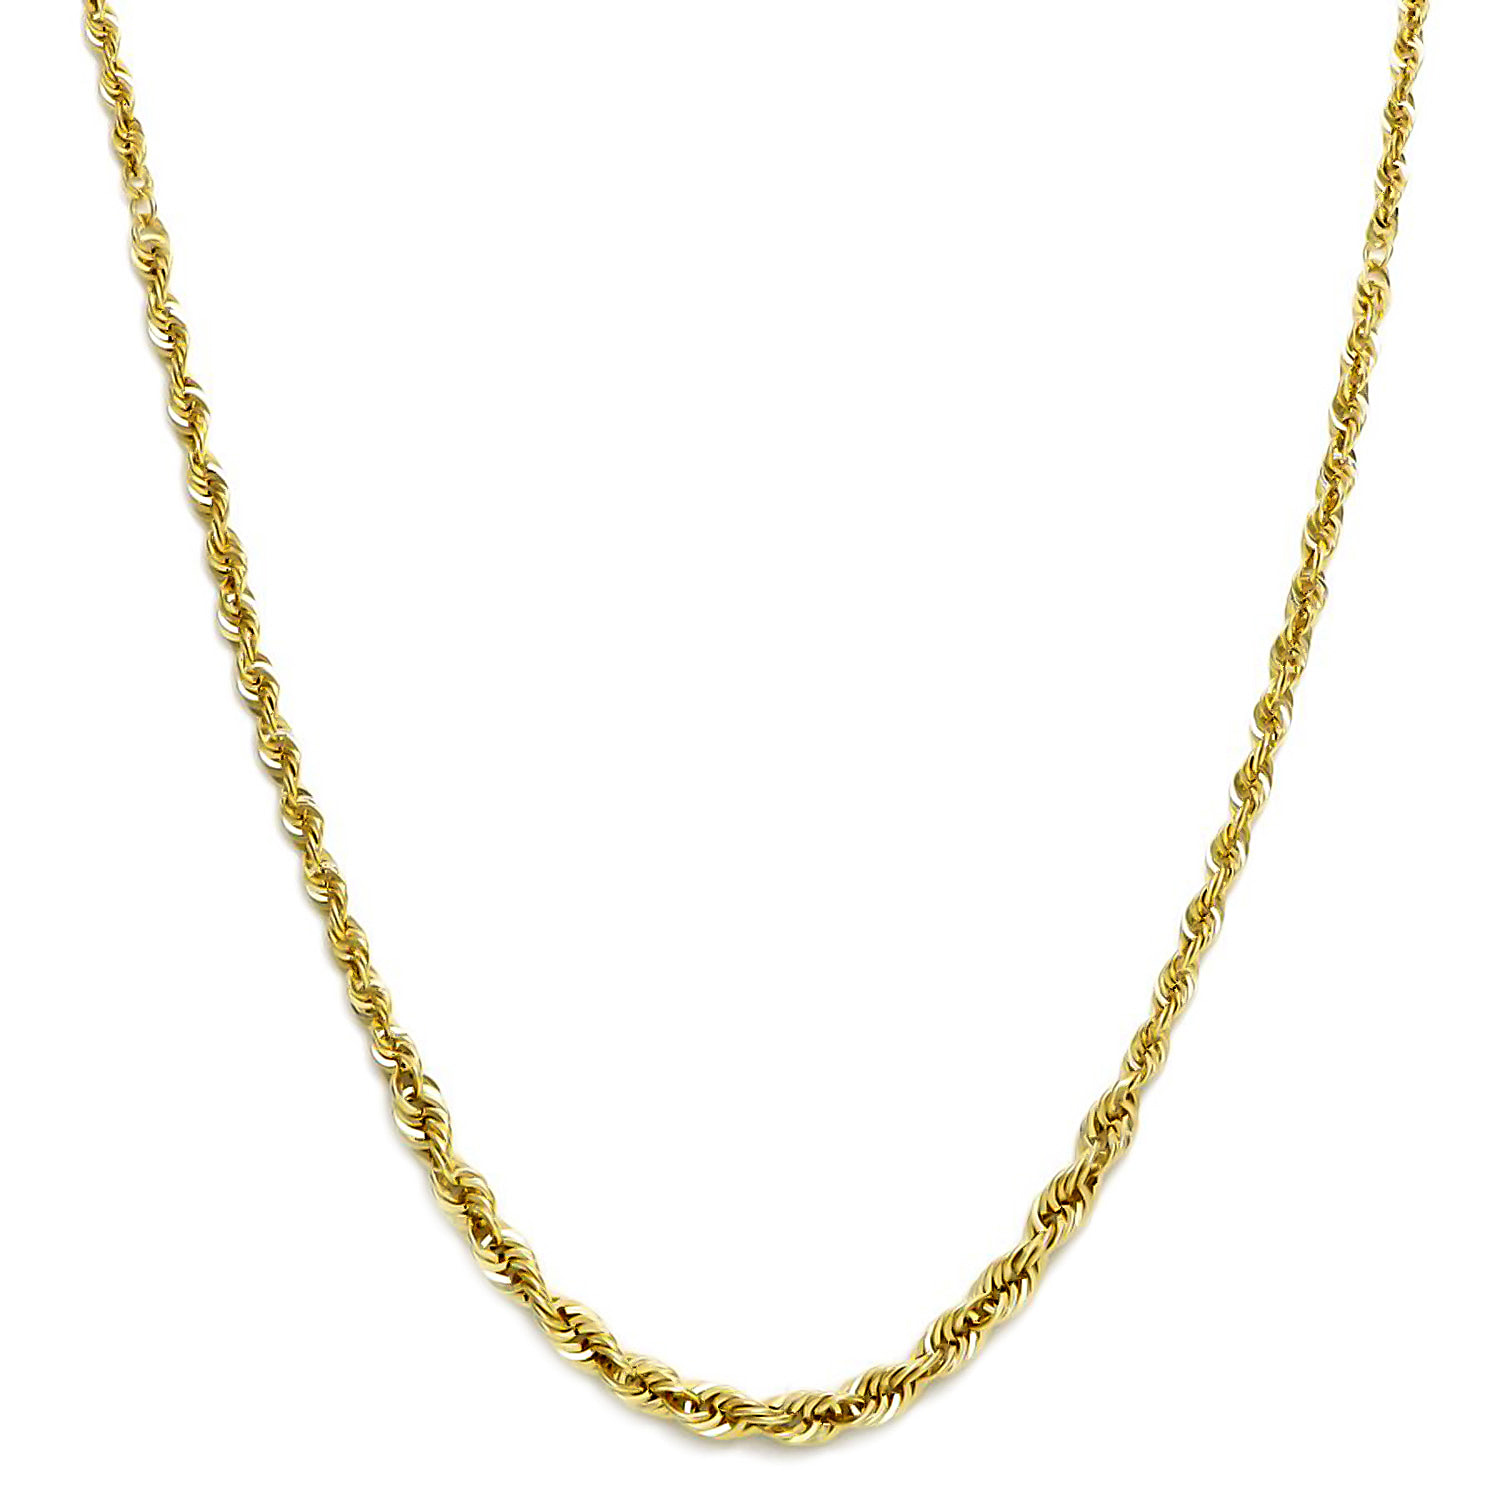 Maestro Collection - 9K Yellow Gold Graduated Spiral Rope Necklace (Size - 20)